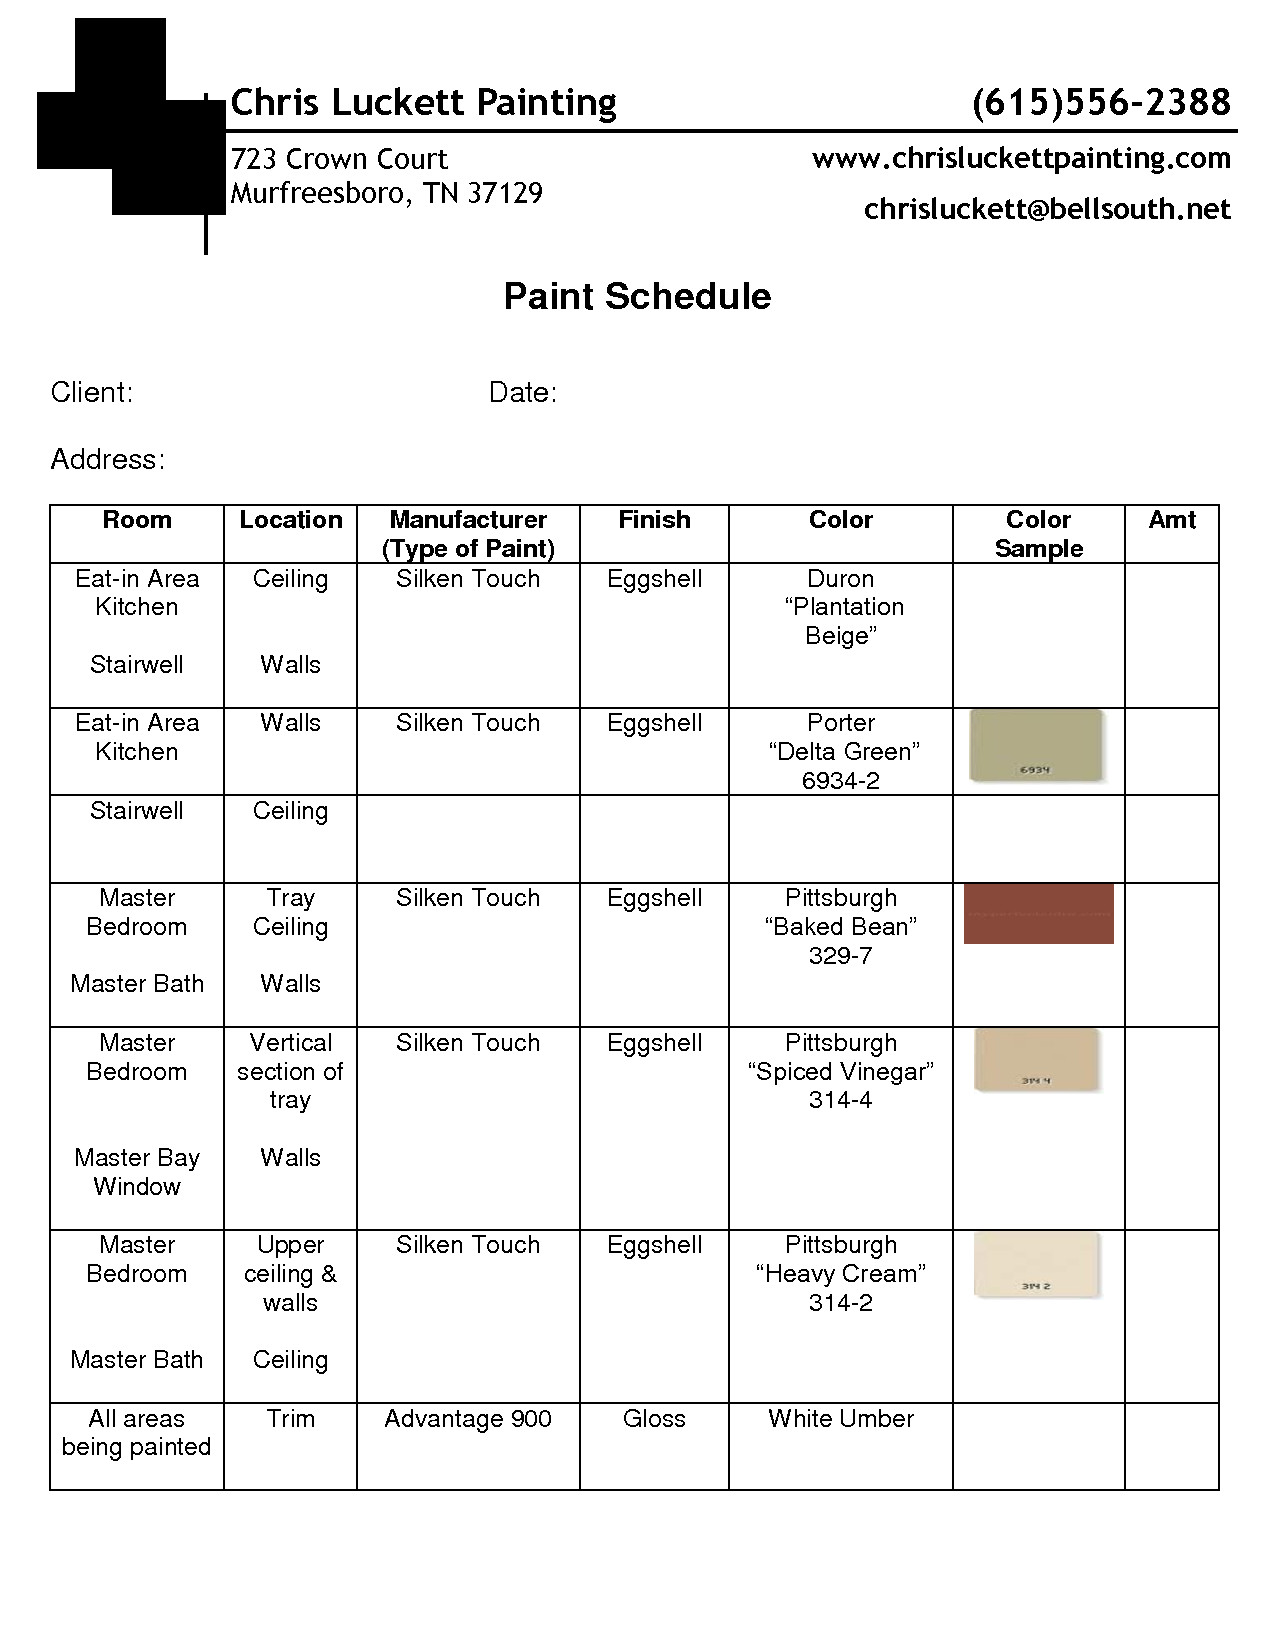 paint schedule example GUIDELINES in 2019